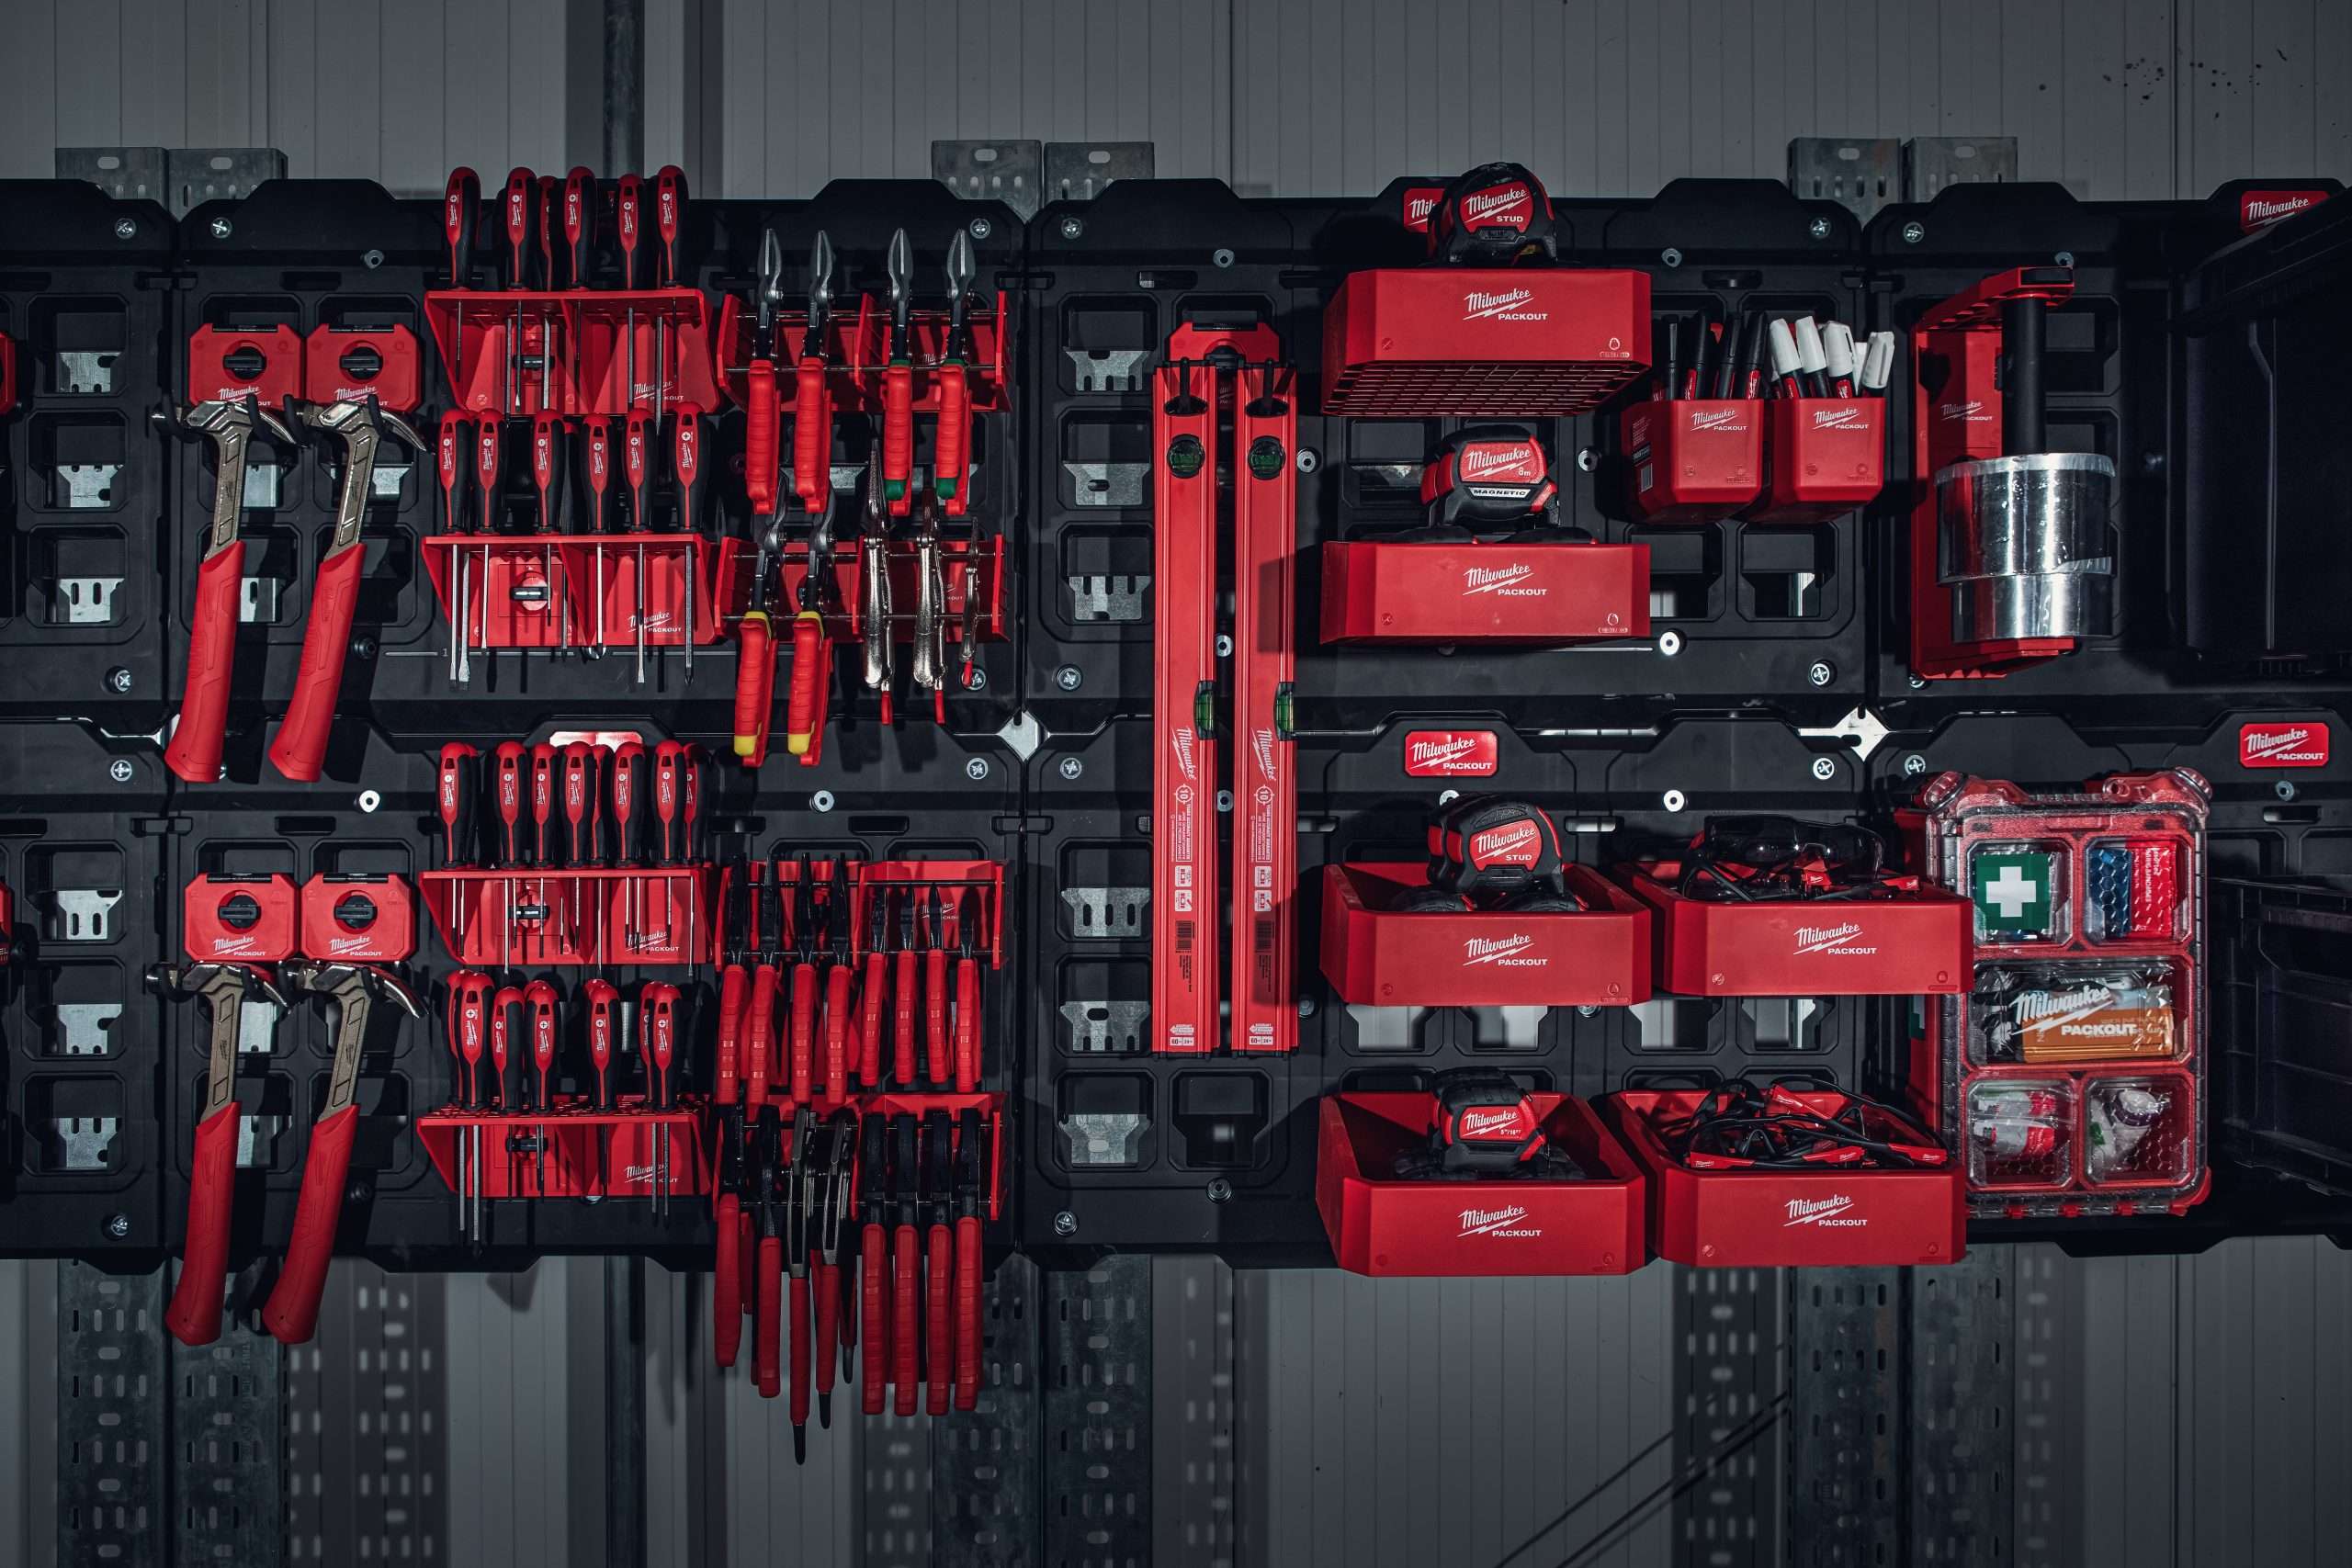 An image of the Magenta Self Store Milwaukee Tools Available for purchase or hire